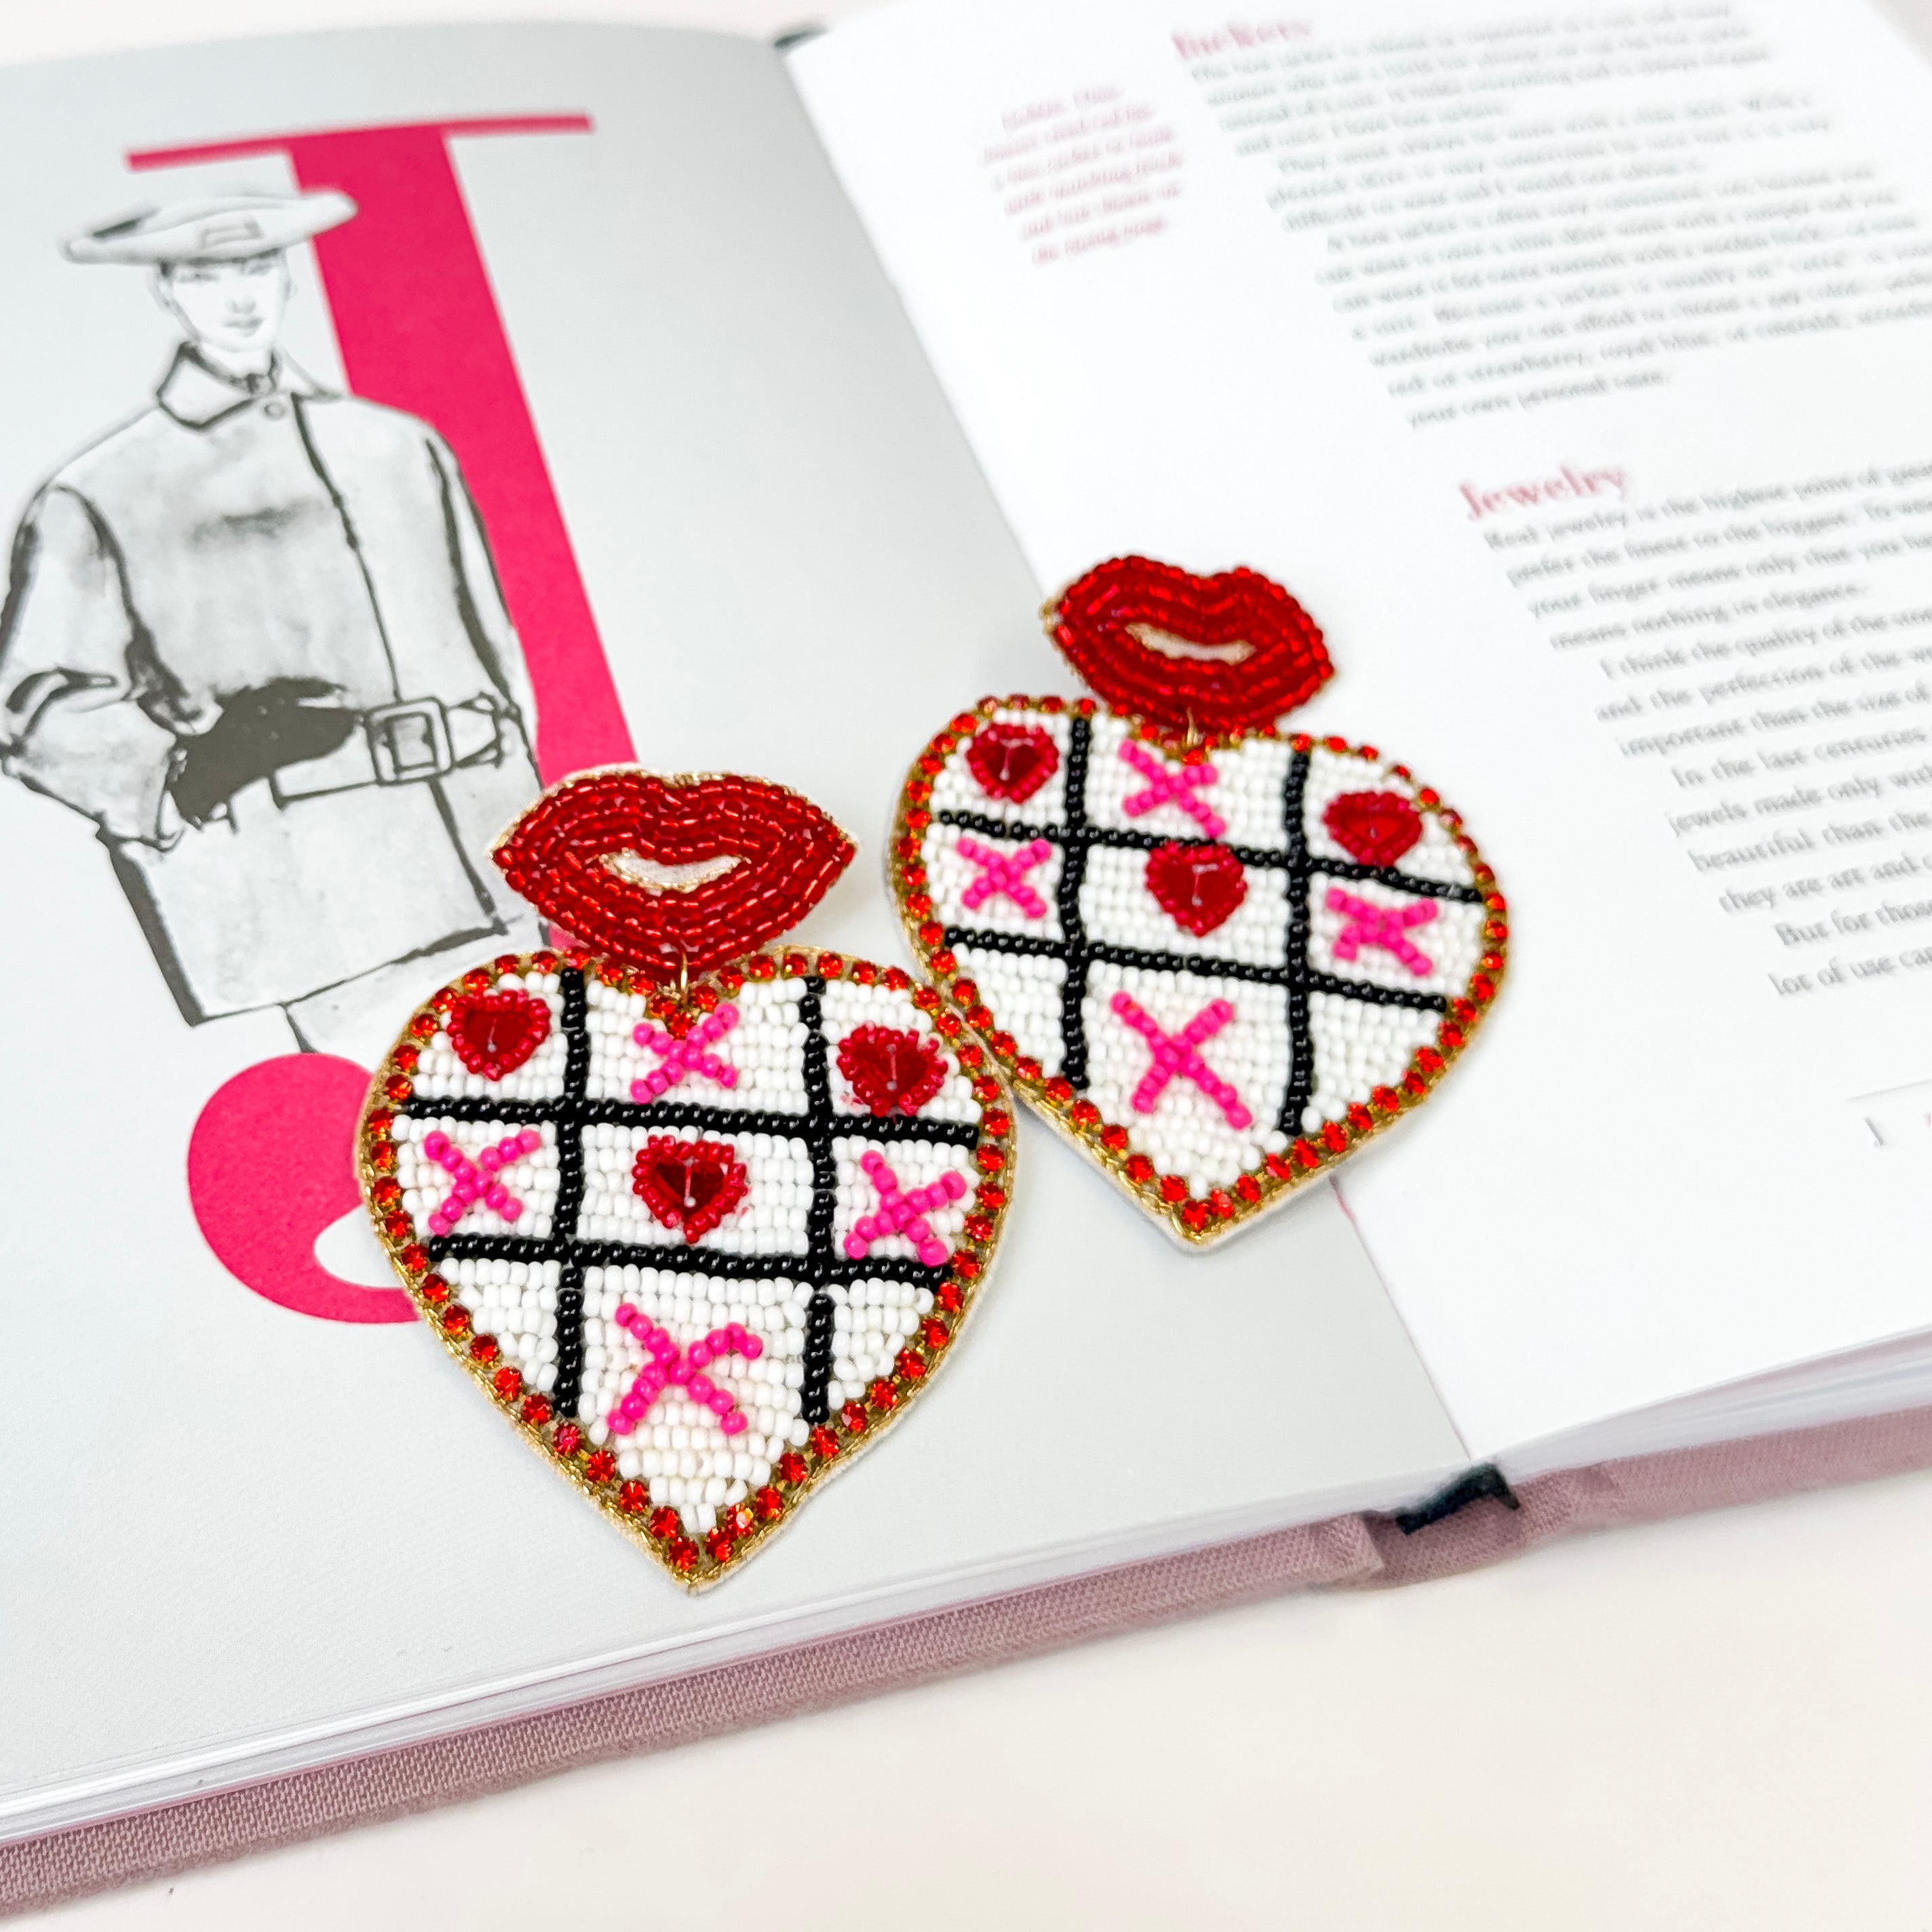 Beaded Heart Shaped Tic Tac Toe Earrings in Red - Giddy Up Glamour Boutique